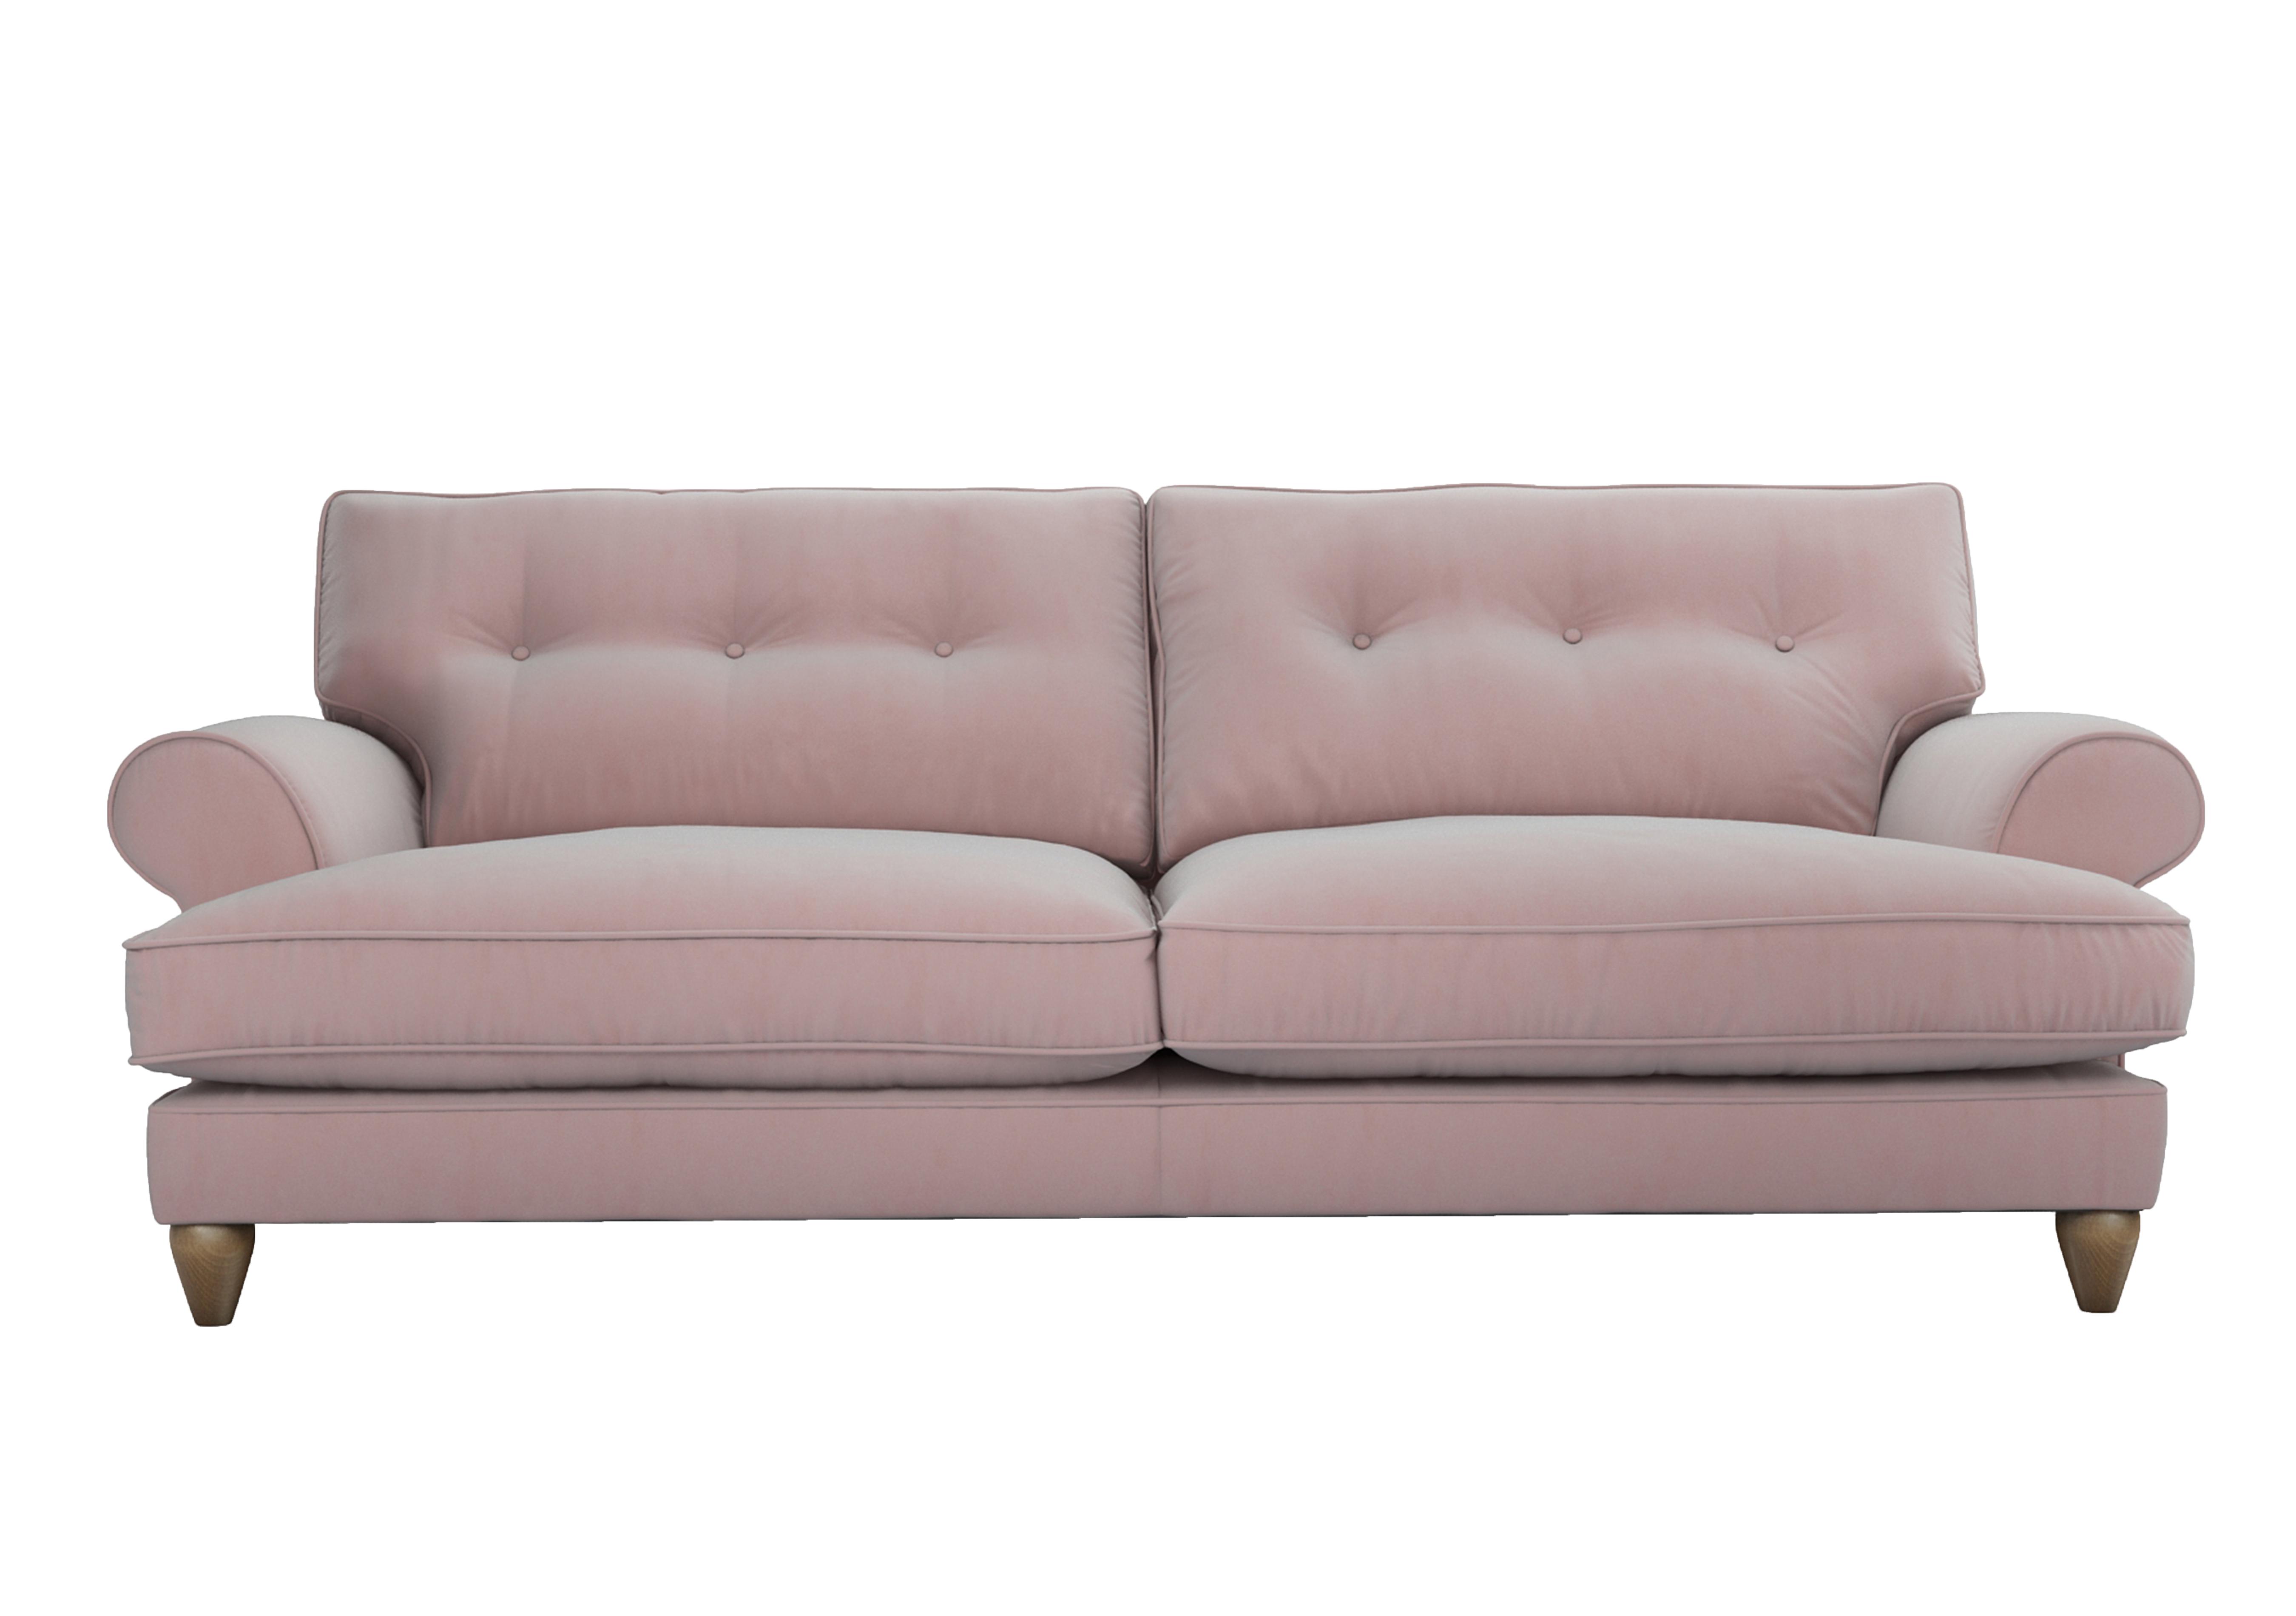 Bronwyn 4 Seater Fabric Classic Back Sofa in Cot256 Cotton Candy on Furniture Village